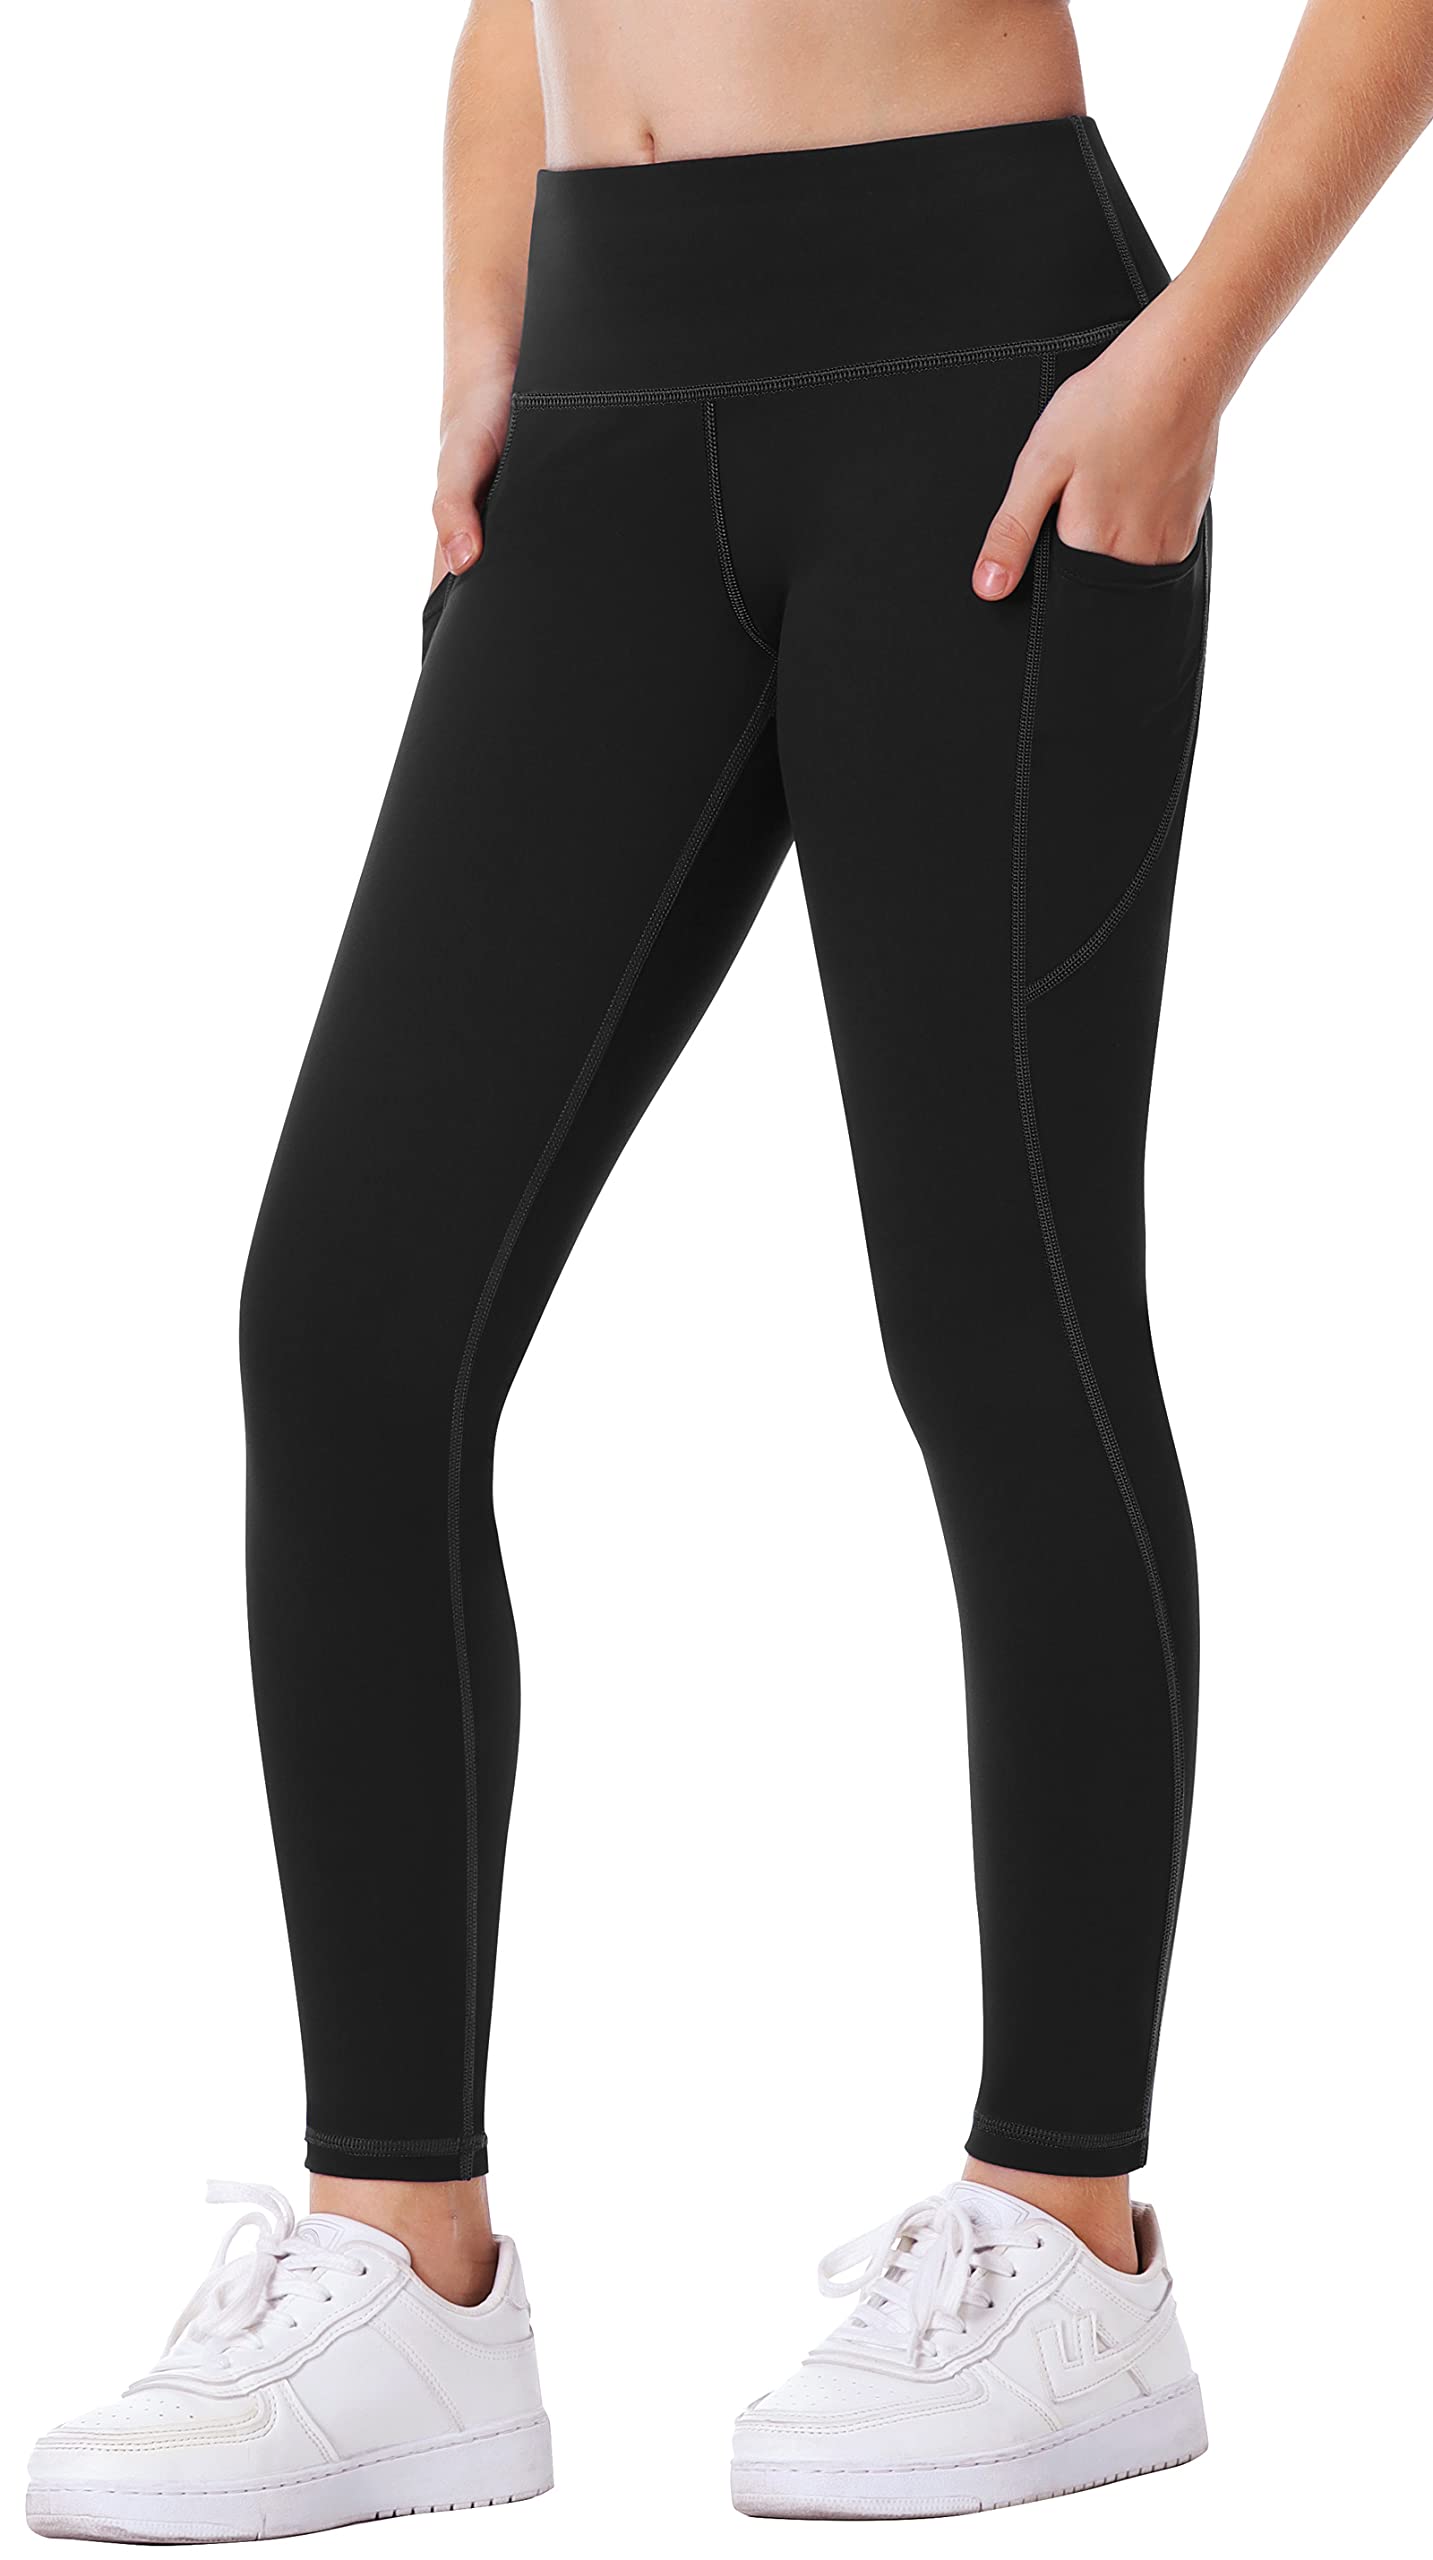 Top more than 232 girls leggings with pockets best